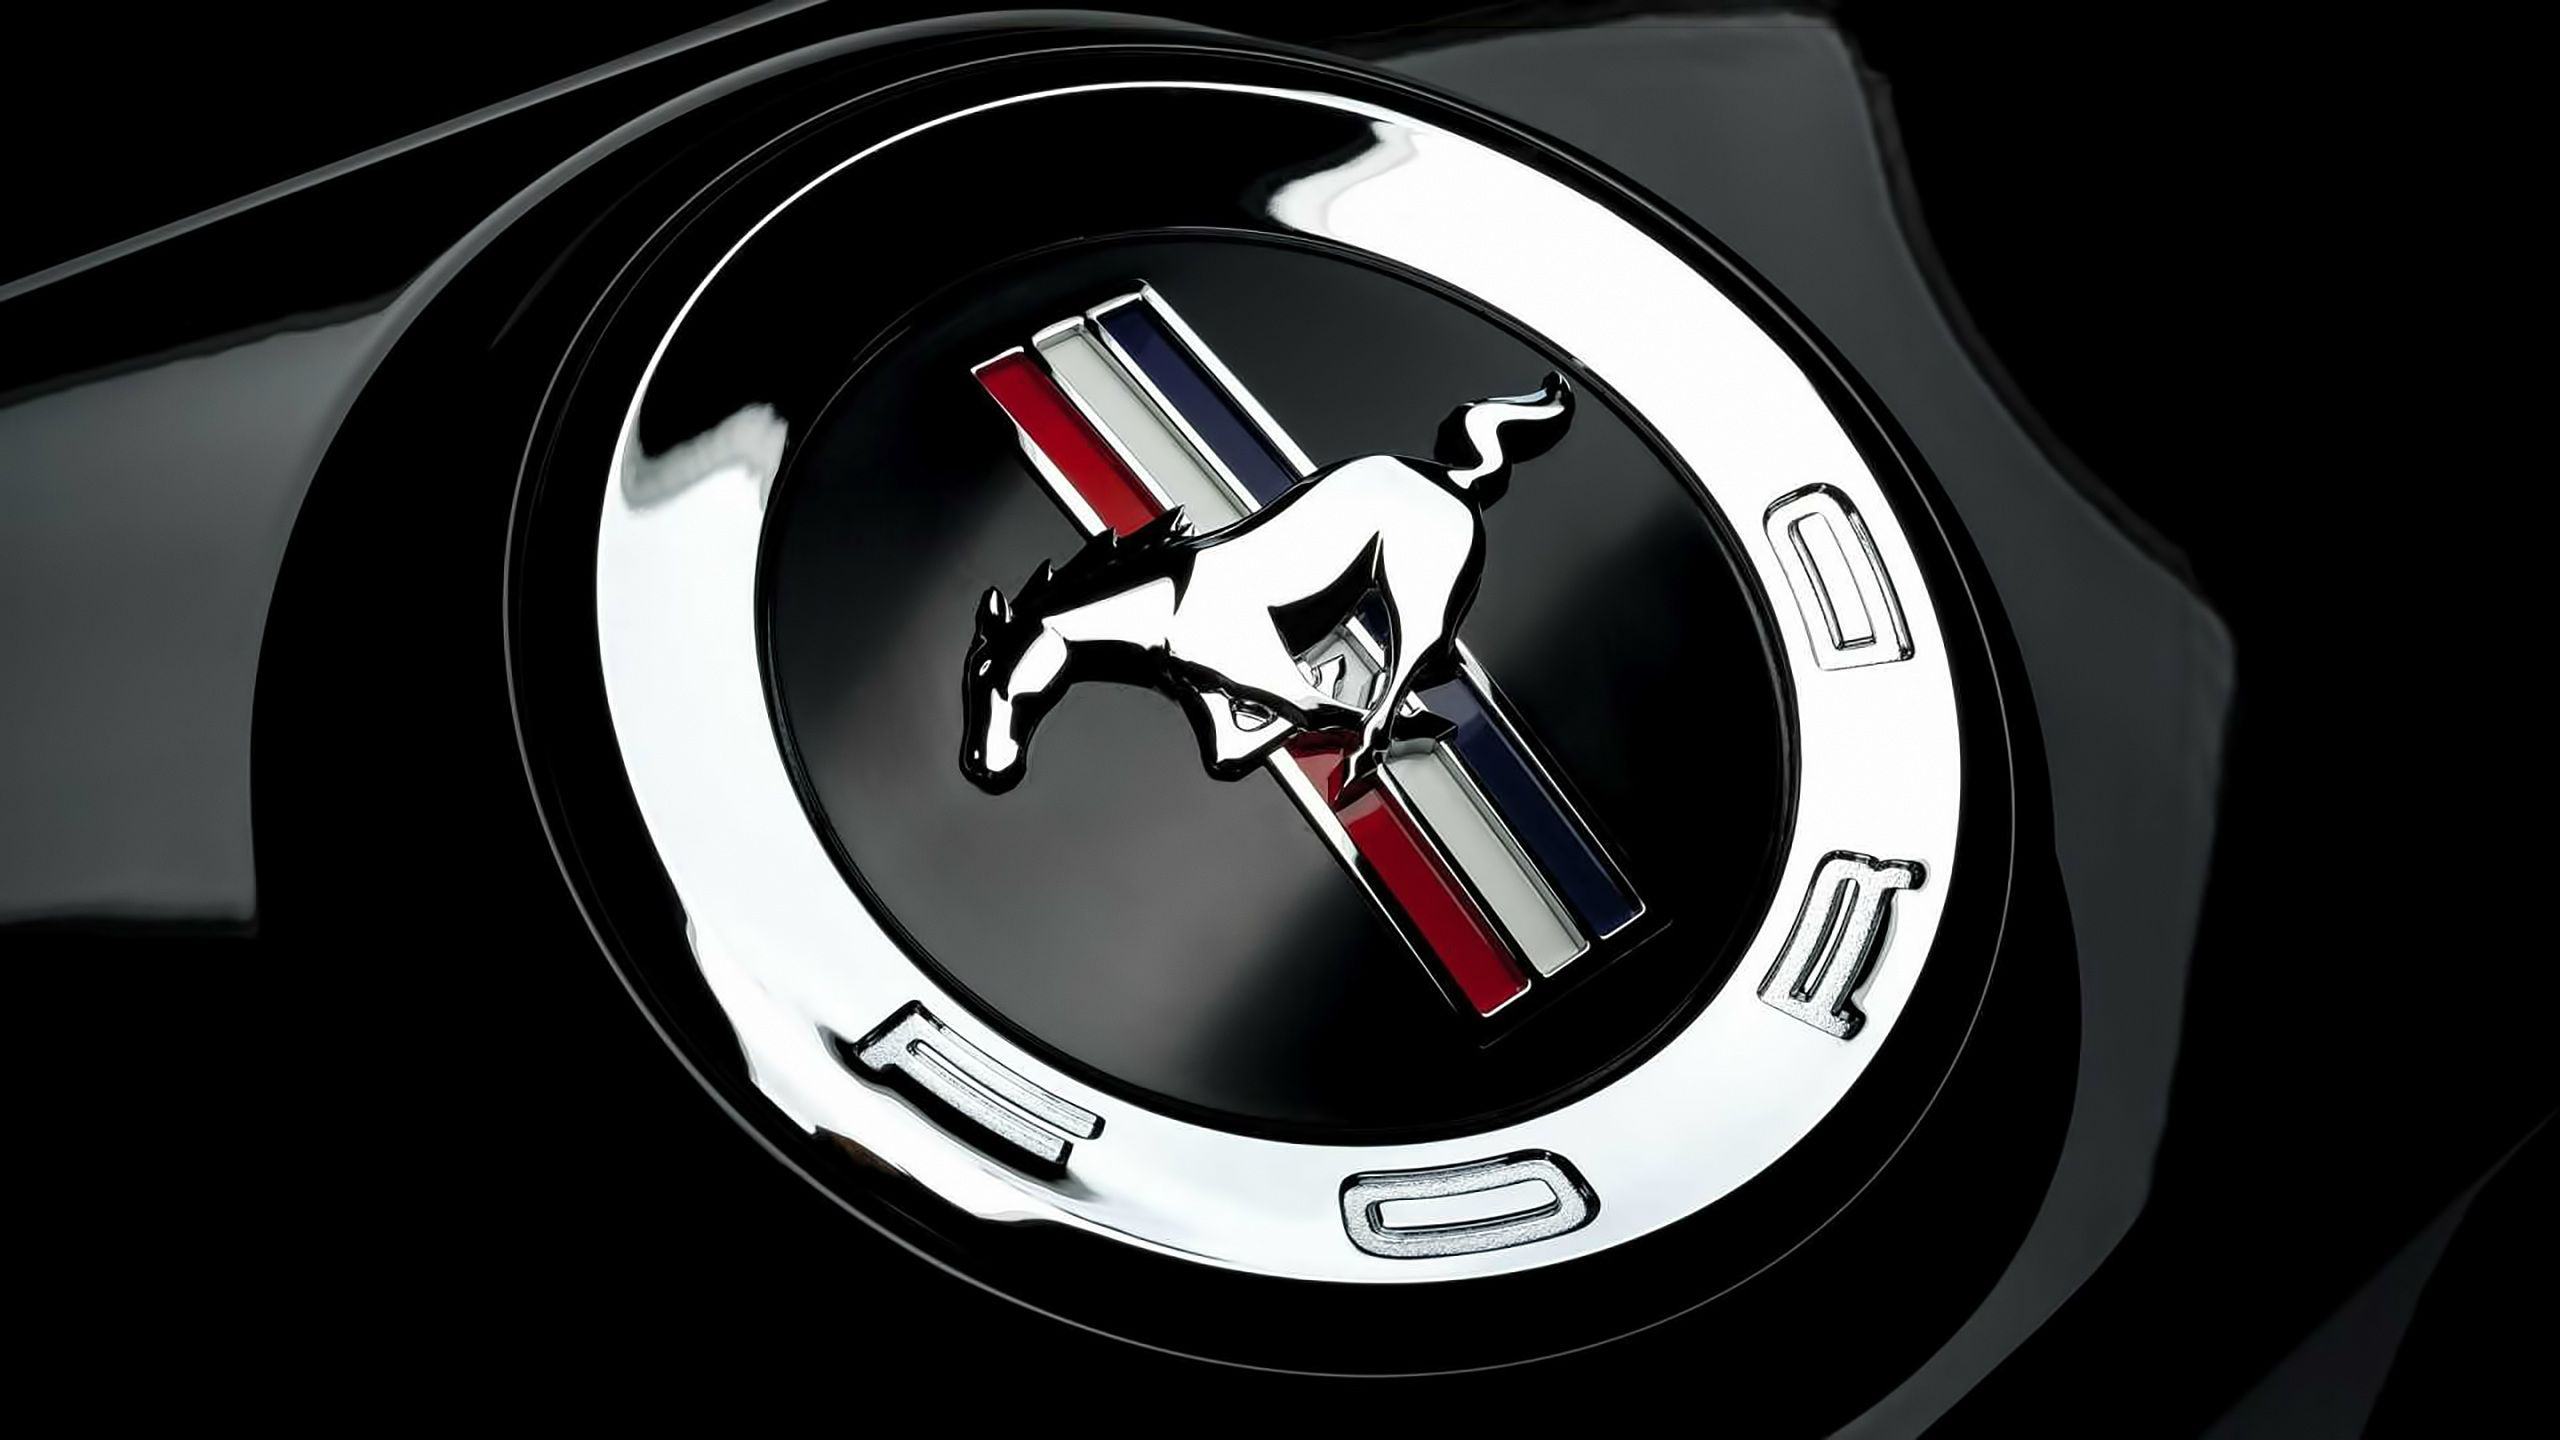 2560x1440 Mustang Logo Wallpaper For Iphone #BNM | Ford mustang logo, Mustang emblem, Mustang log